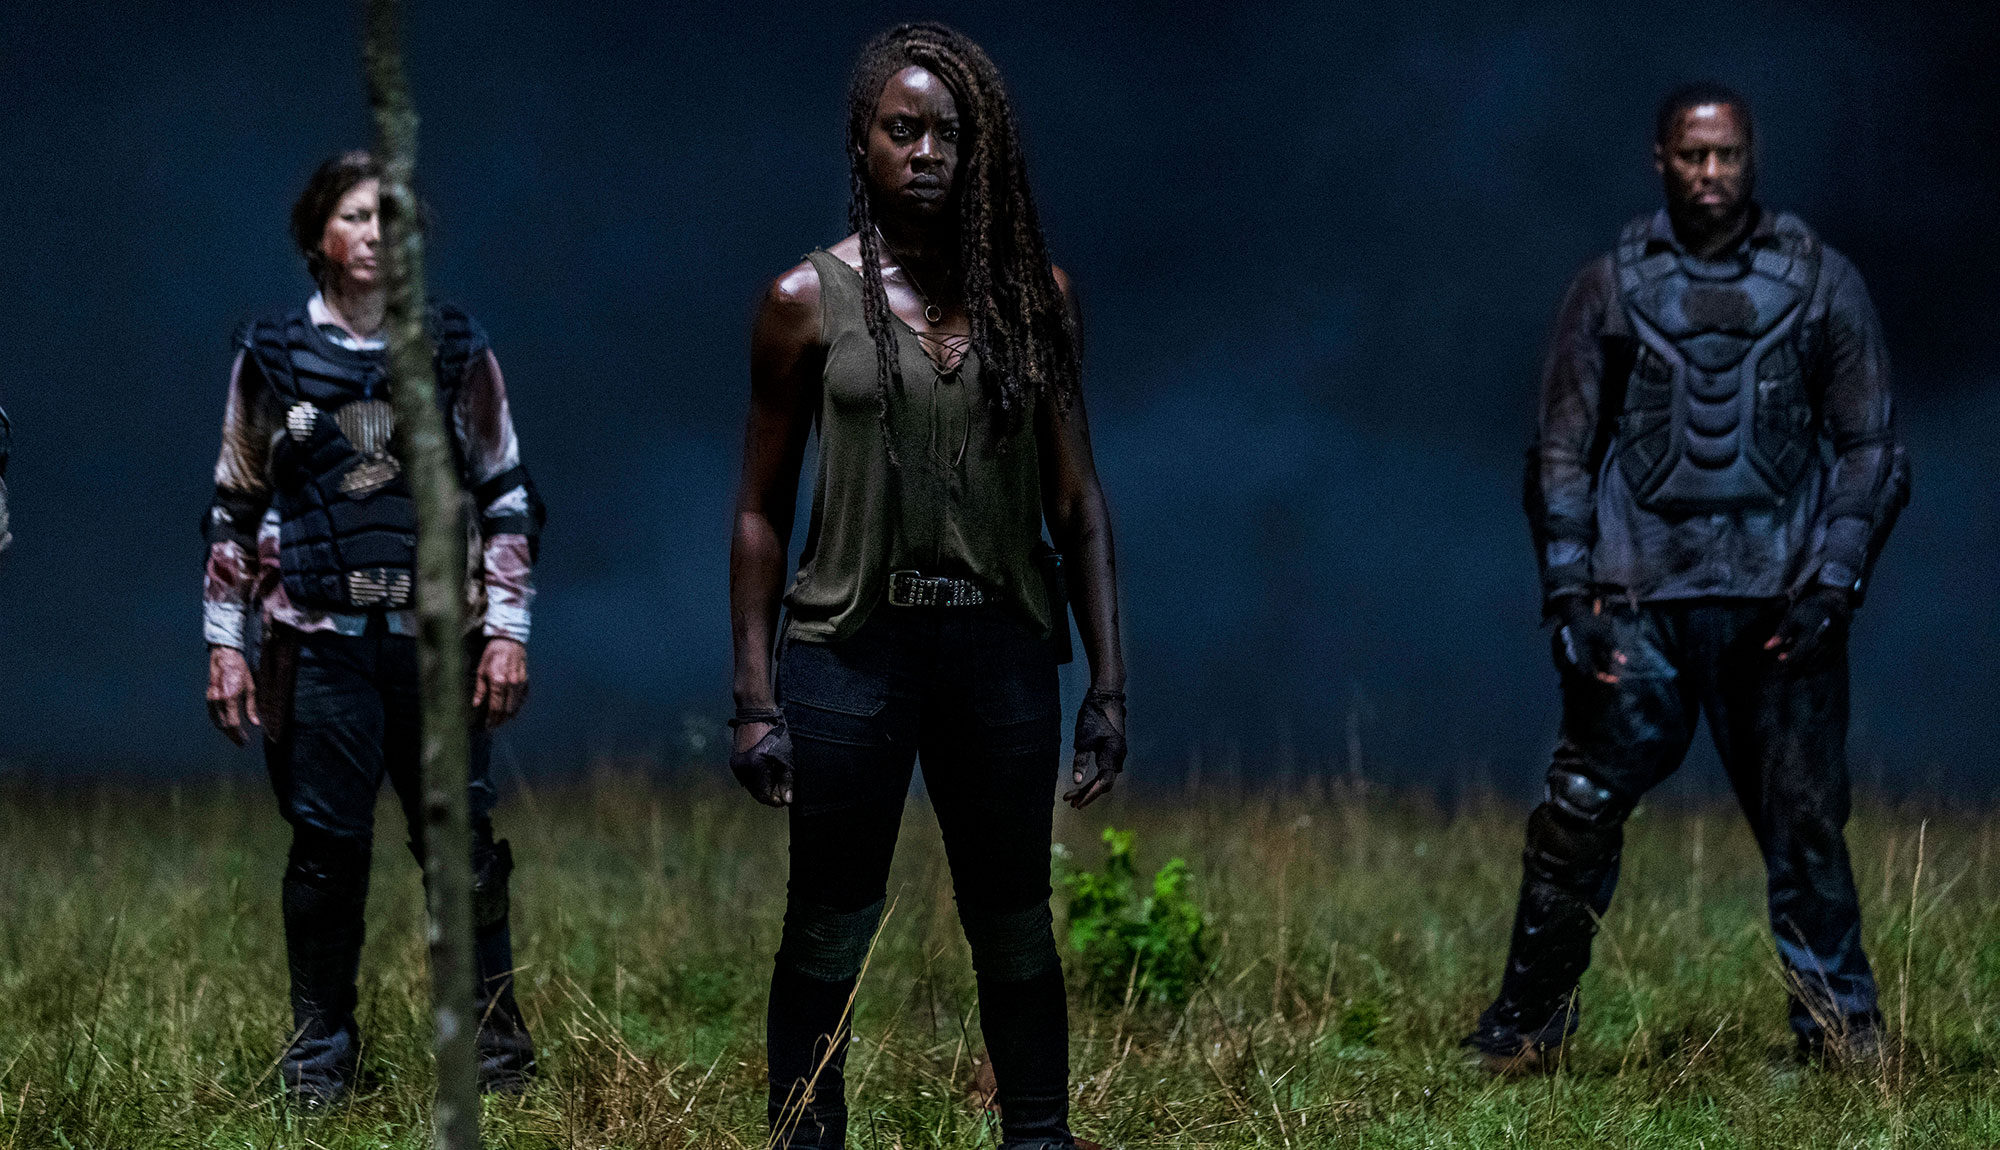 Michonne Confronts Alpha in New Walking Dead Season 10 Images